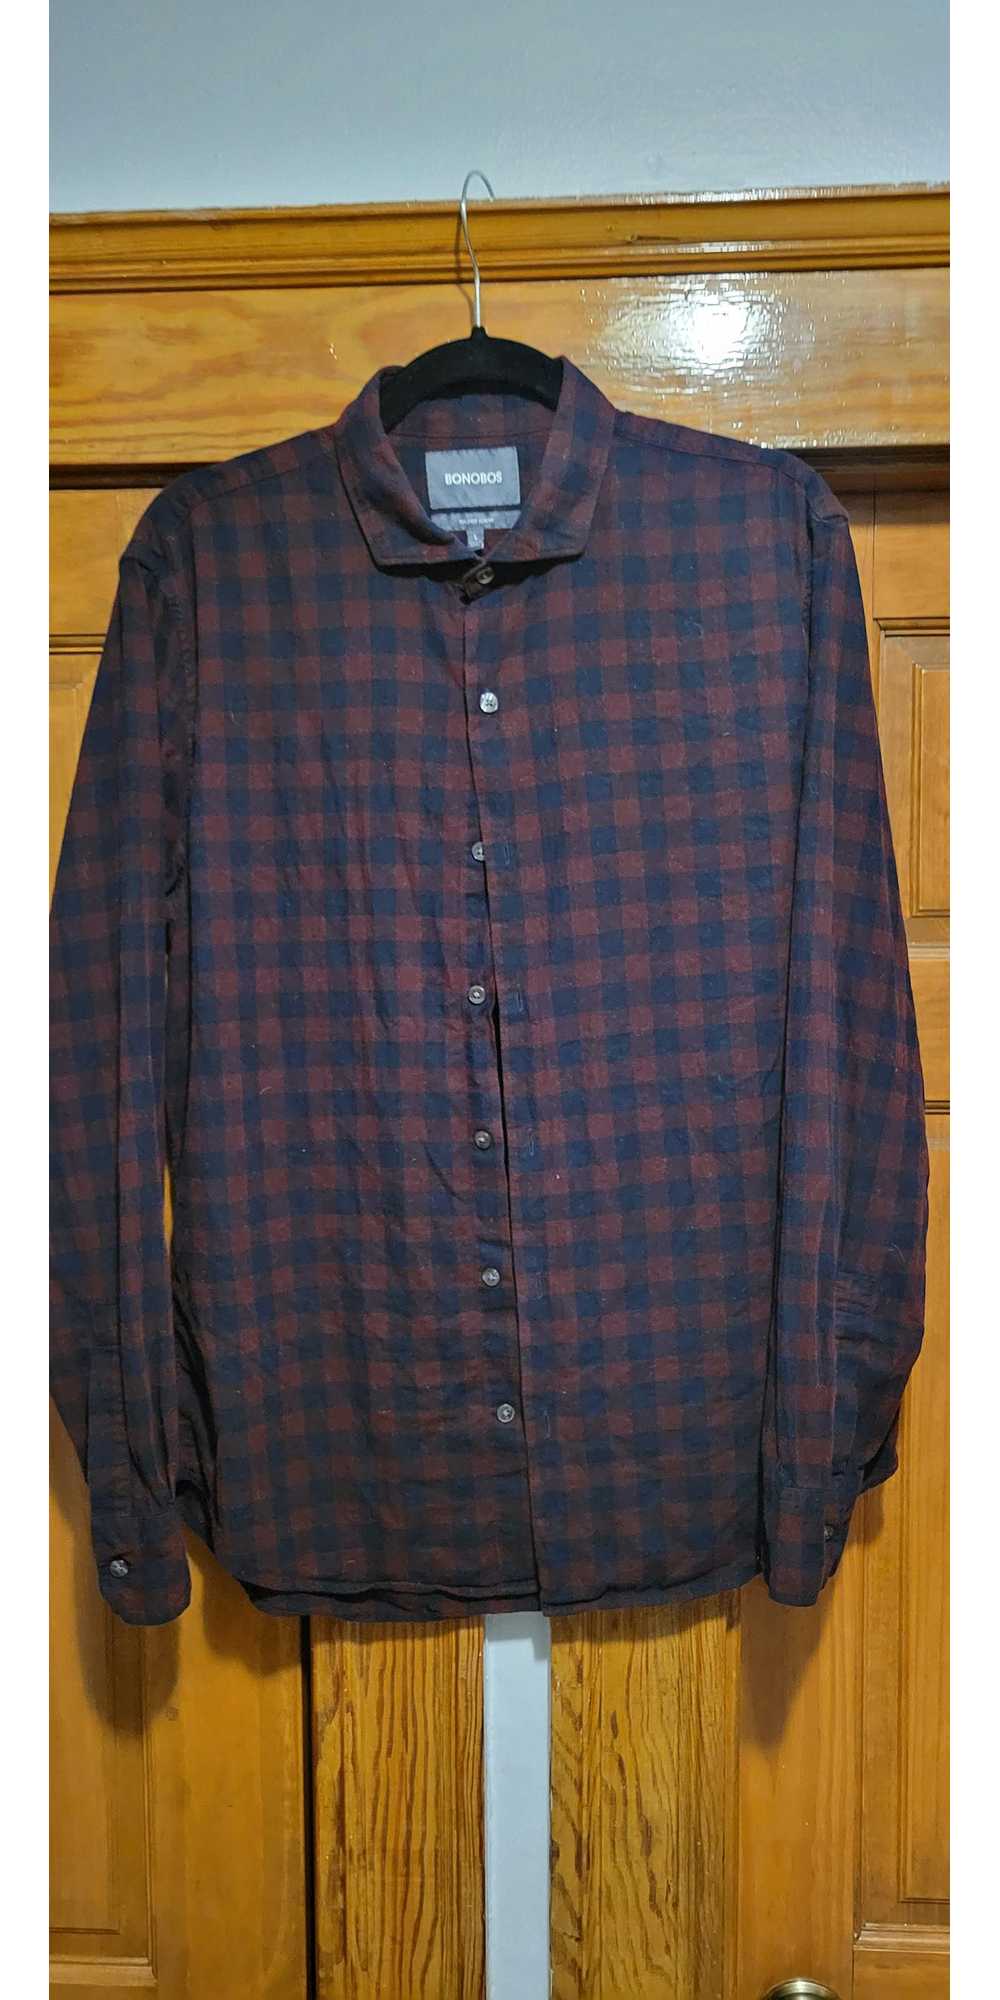 Bonobos Check Flannel - Tailored Slim Fit - image 1